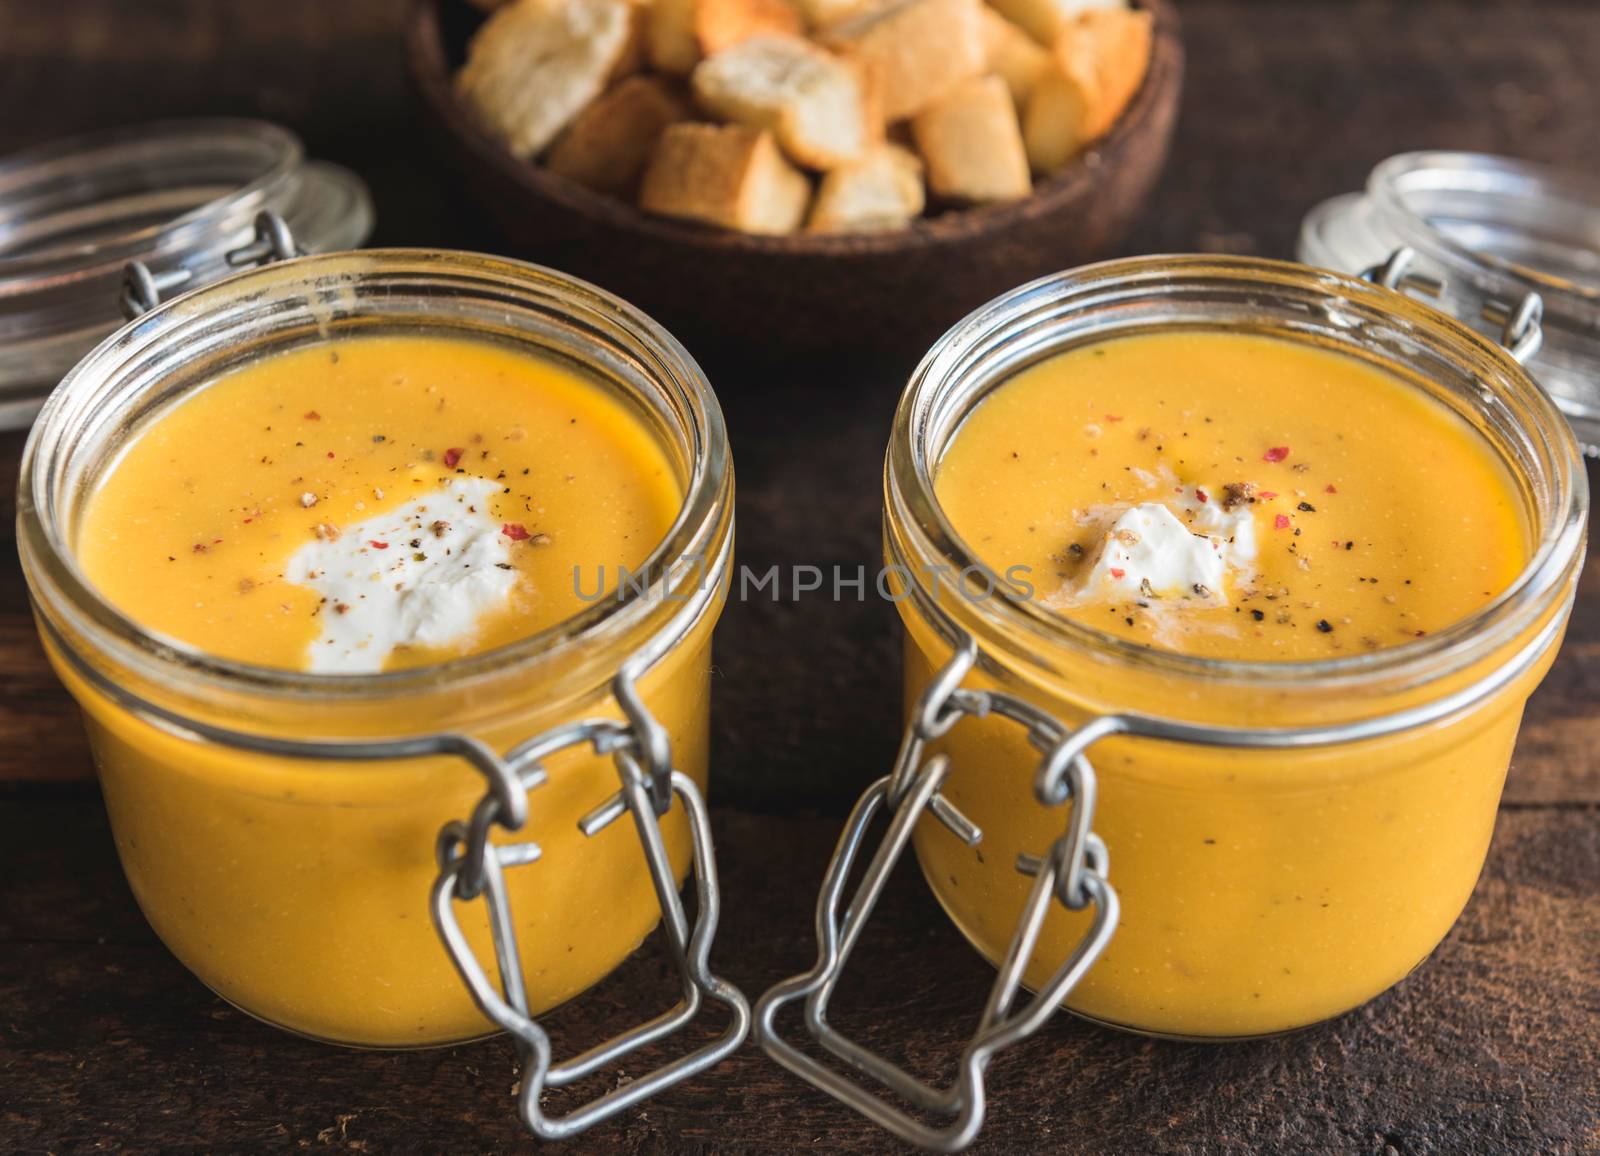 Pumpkin soup in the jars by badmanproduction